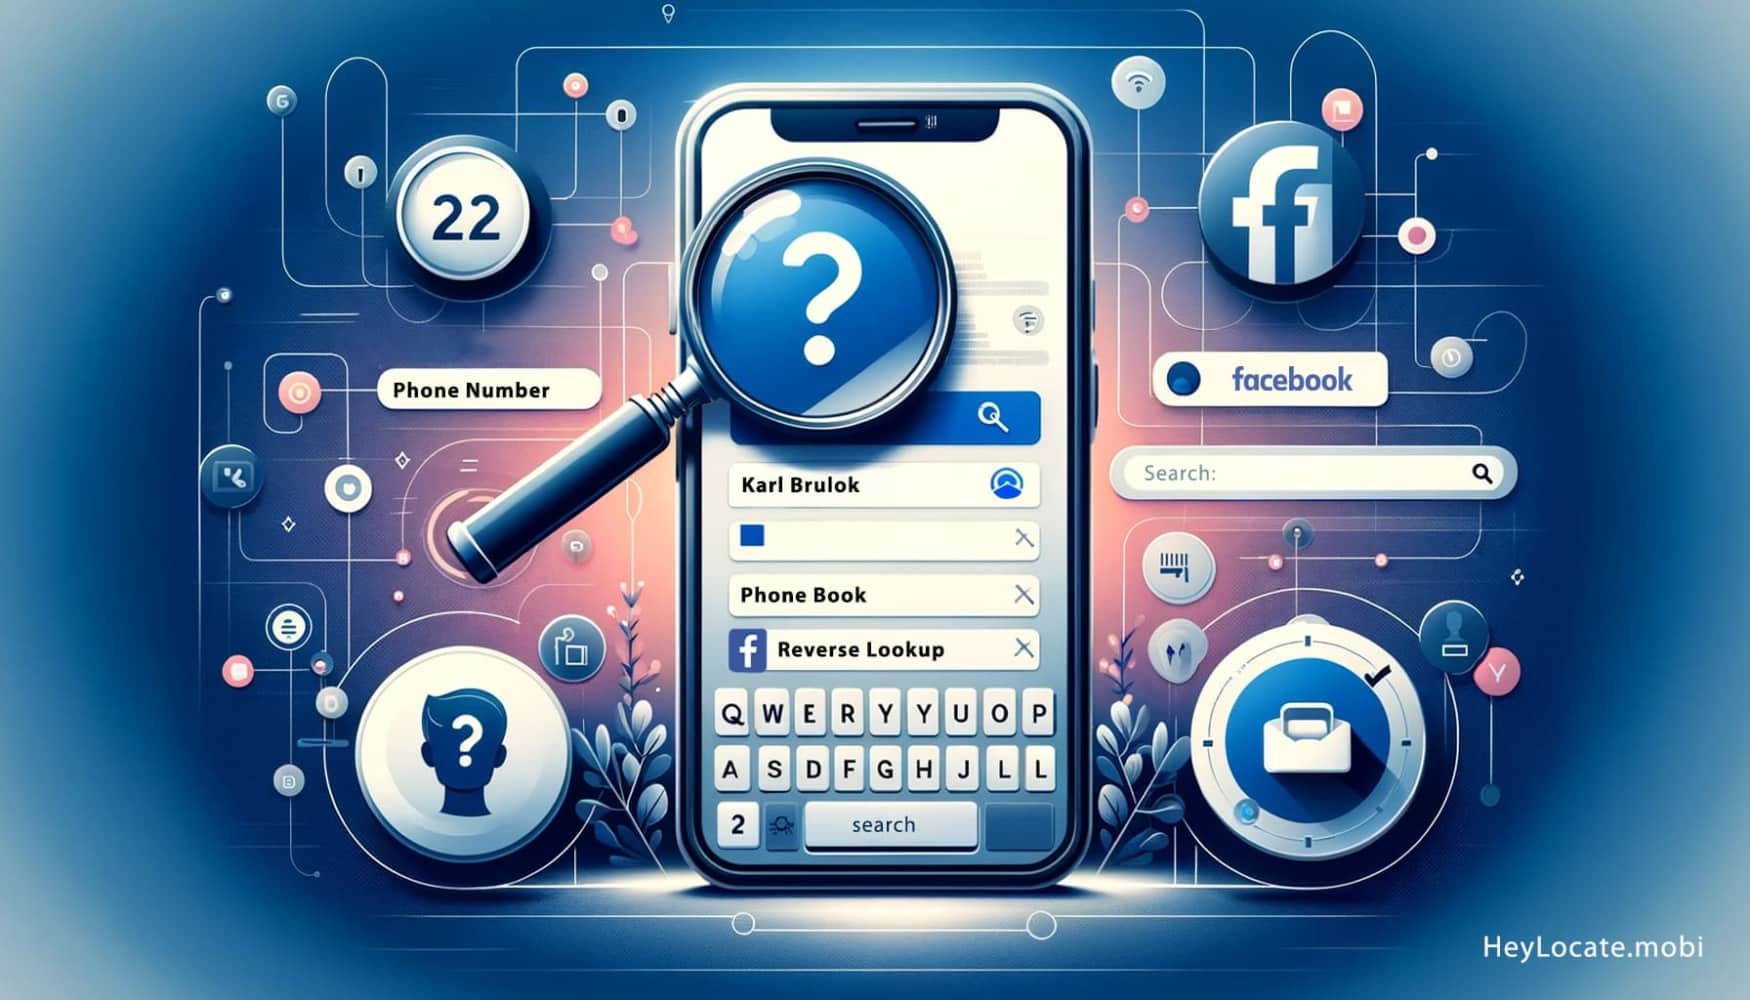 An informative and visually engaging graphic for an article about finding someone on Facebook using their phone number. The image should feature a smartphone displaying a Facebook search page with a magnifying glass icon and a generic phone number in the search bar. Additionally: a phone book syncing with Facebook, a reverse lookup tool, and a Facebook phone number search feature. This image is to illustrate the concept of using a phone number to search for people on Facebook